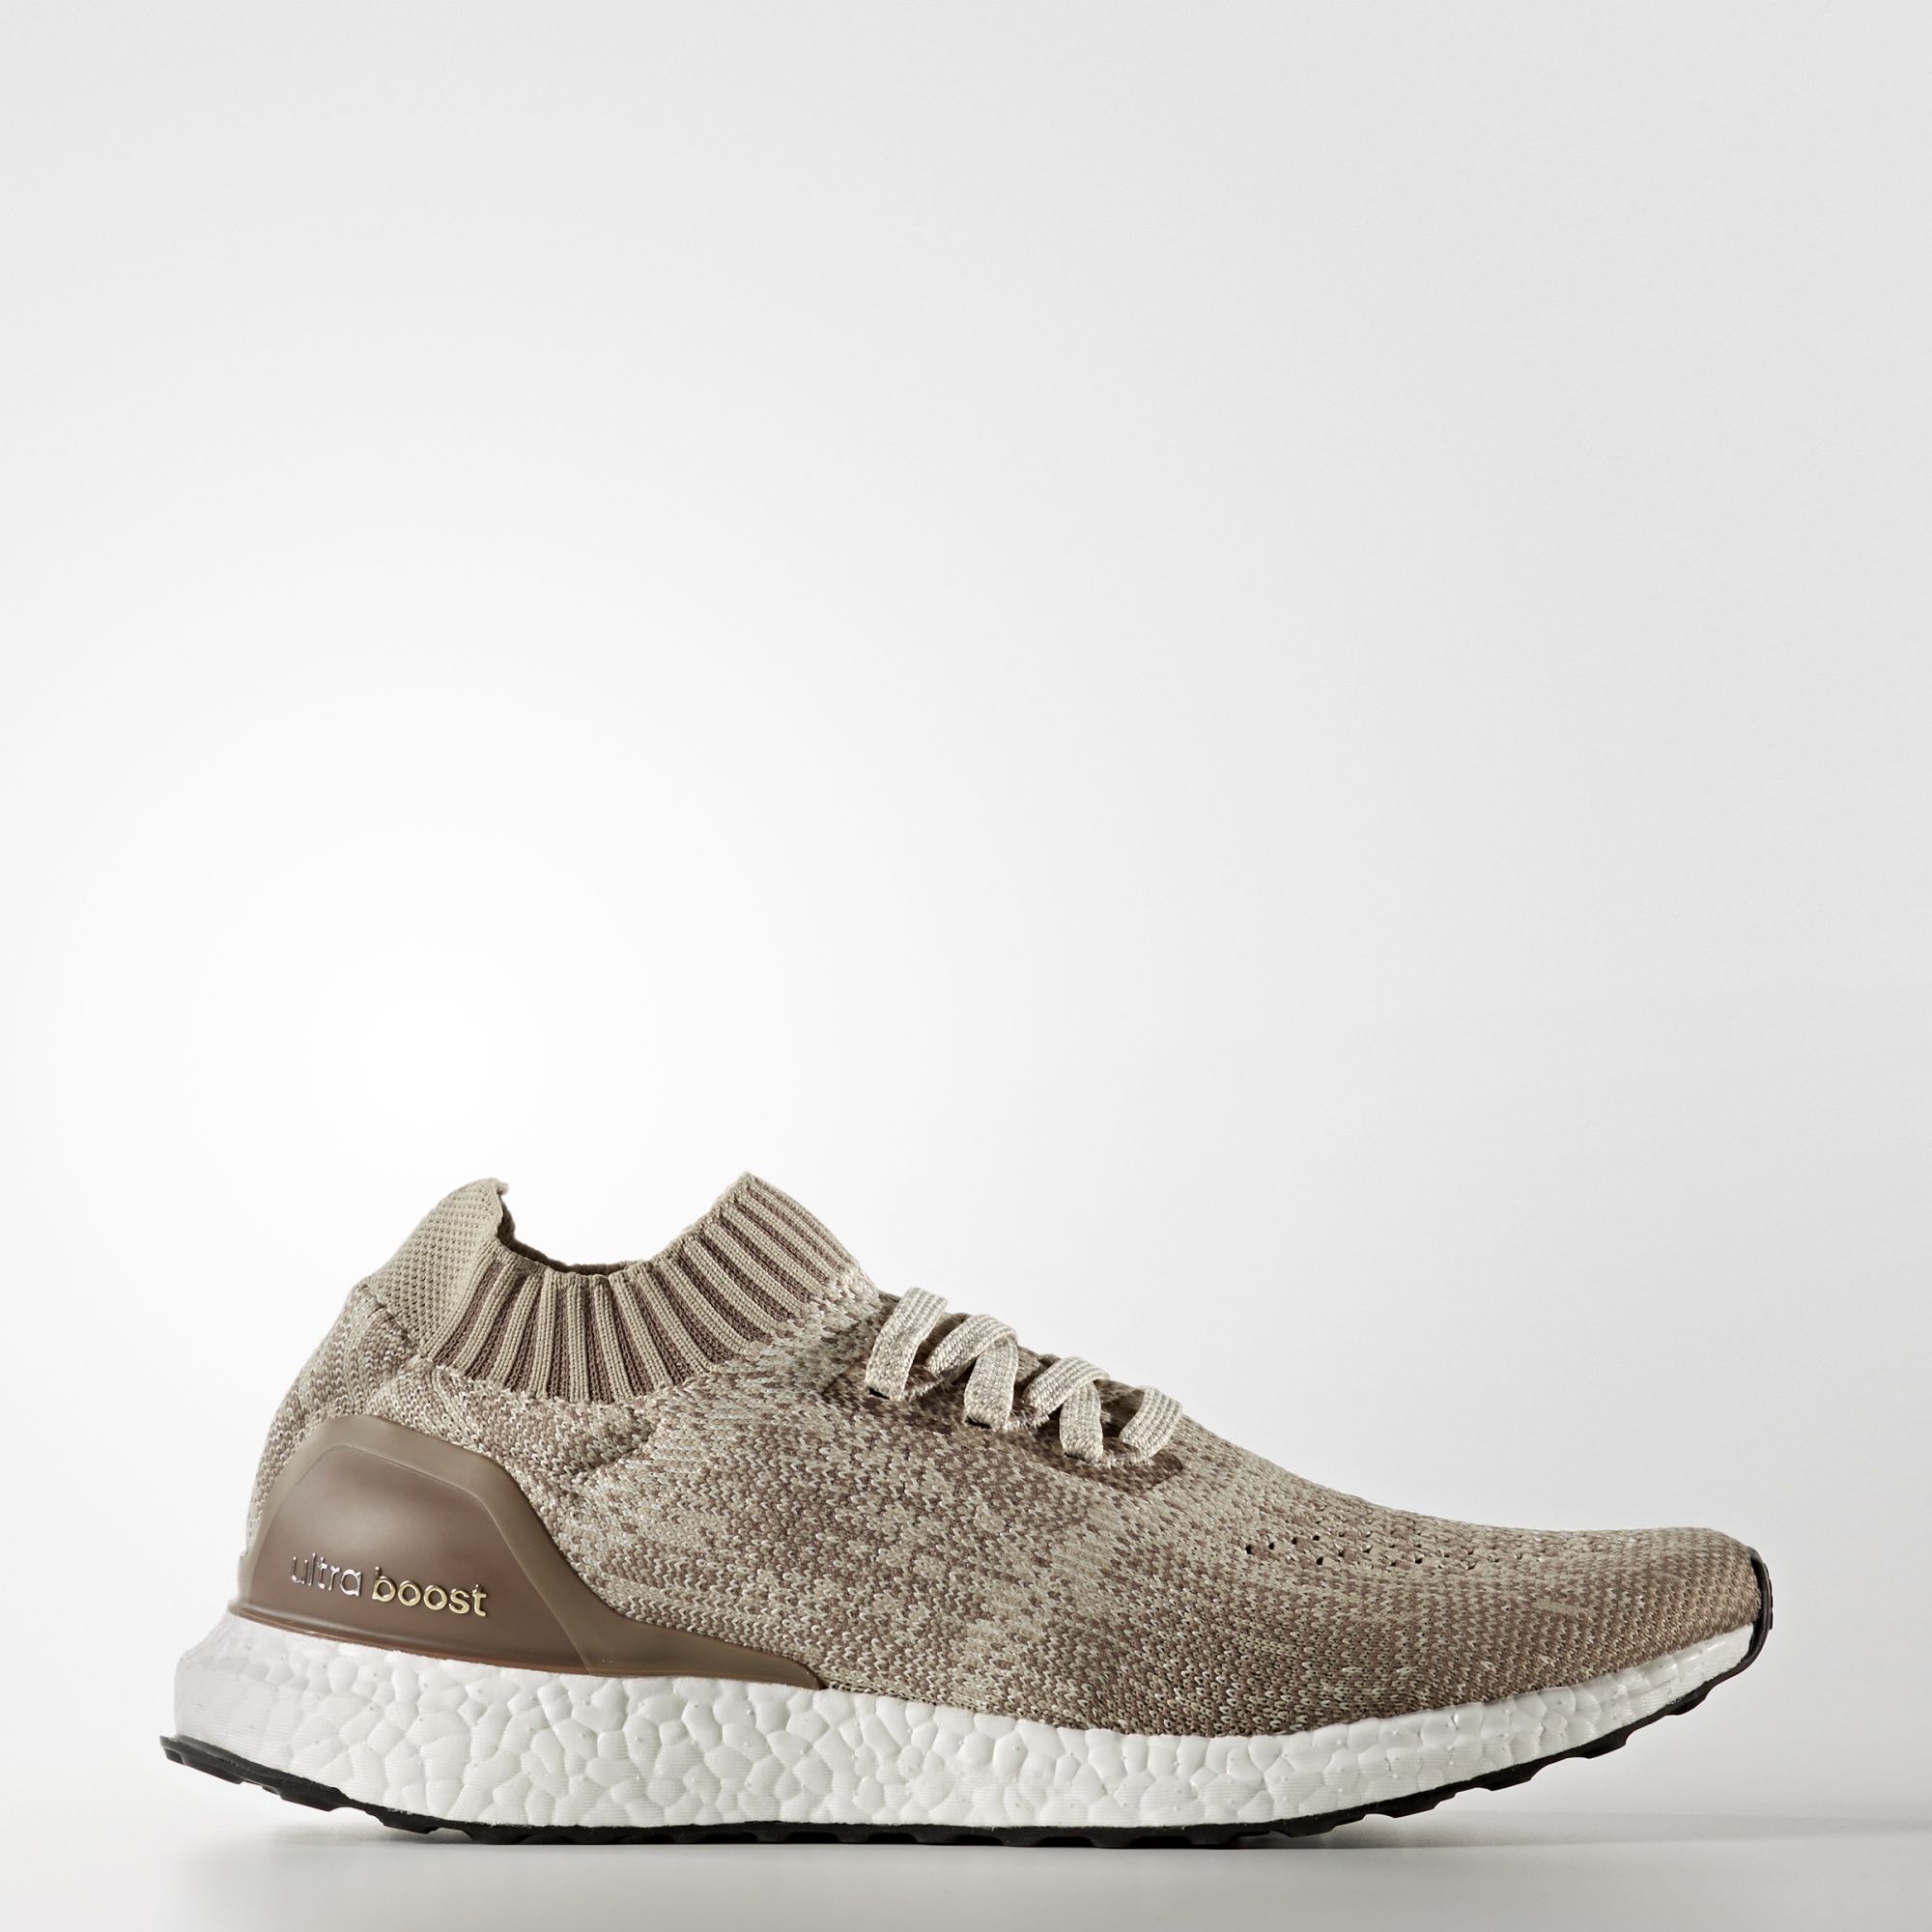 adidas-ultra-boost-uncaged-clear-brown-2